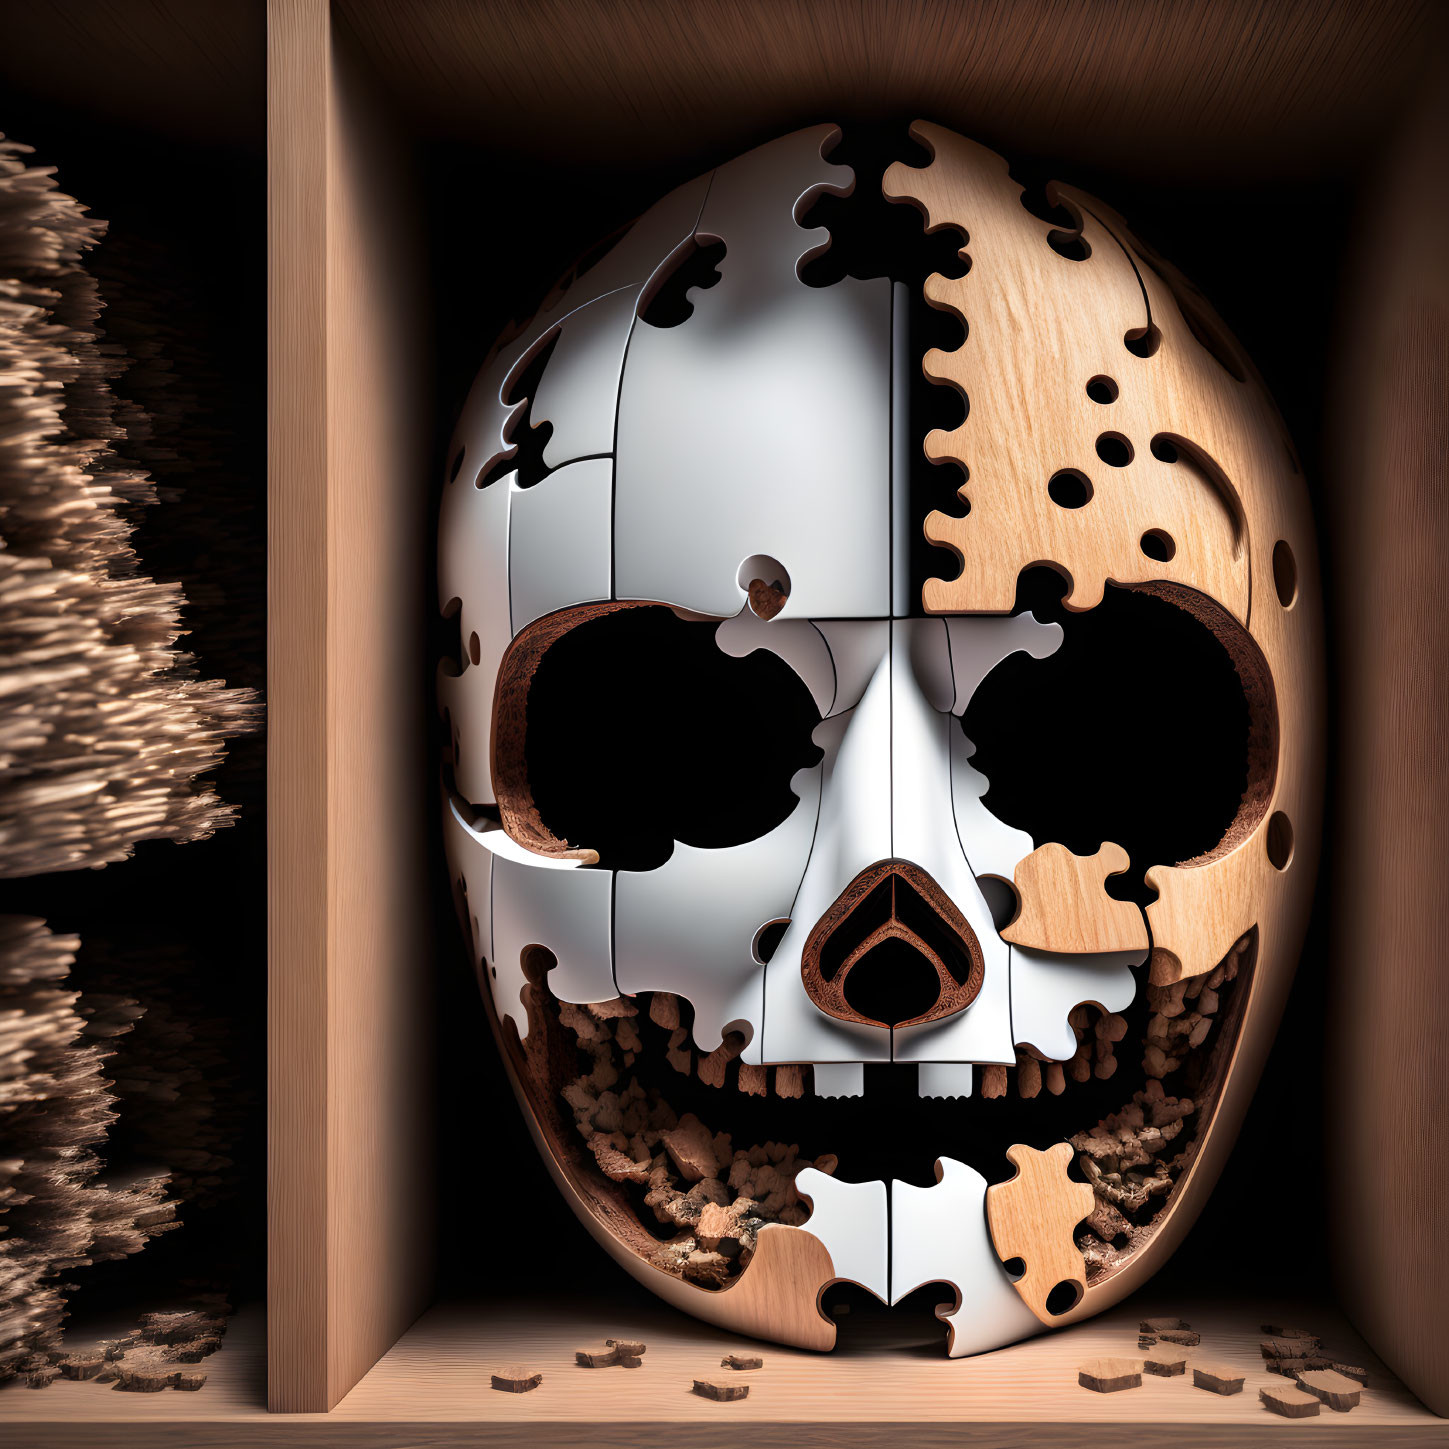 Skull 3D Puzzle on Woody Background in Closet Setting